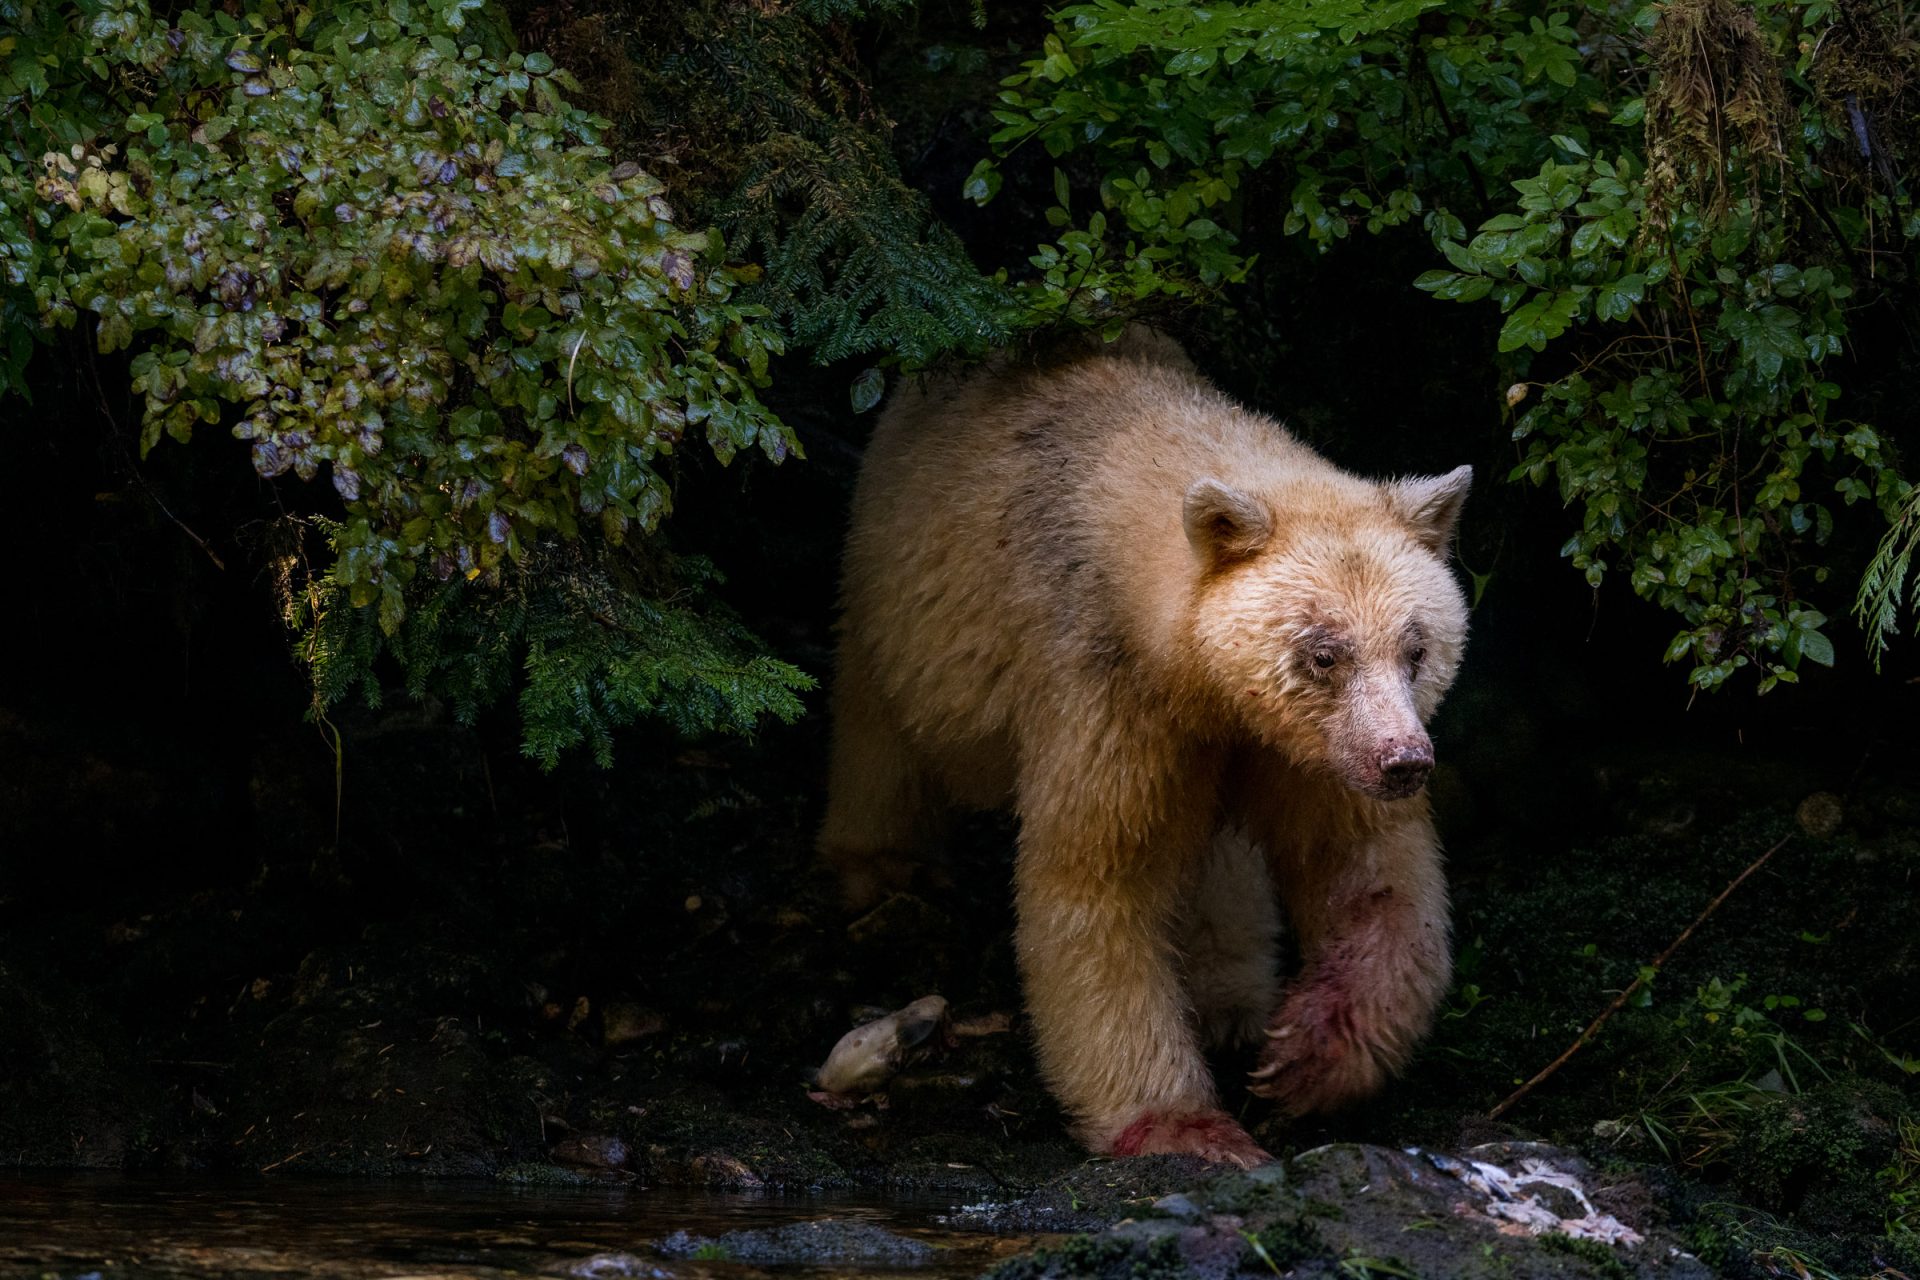 A spirit bear, or kermode bear (Ursus americanus kermodei), paws stained with blood, emerges from the treeline to return to the river to feed on salmon. These bears have been known to catch more than a dozen fish in a day. Great Bear Rainforest, British Columbia, Canada.